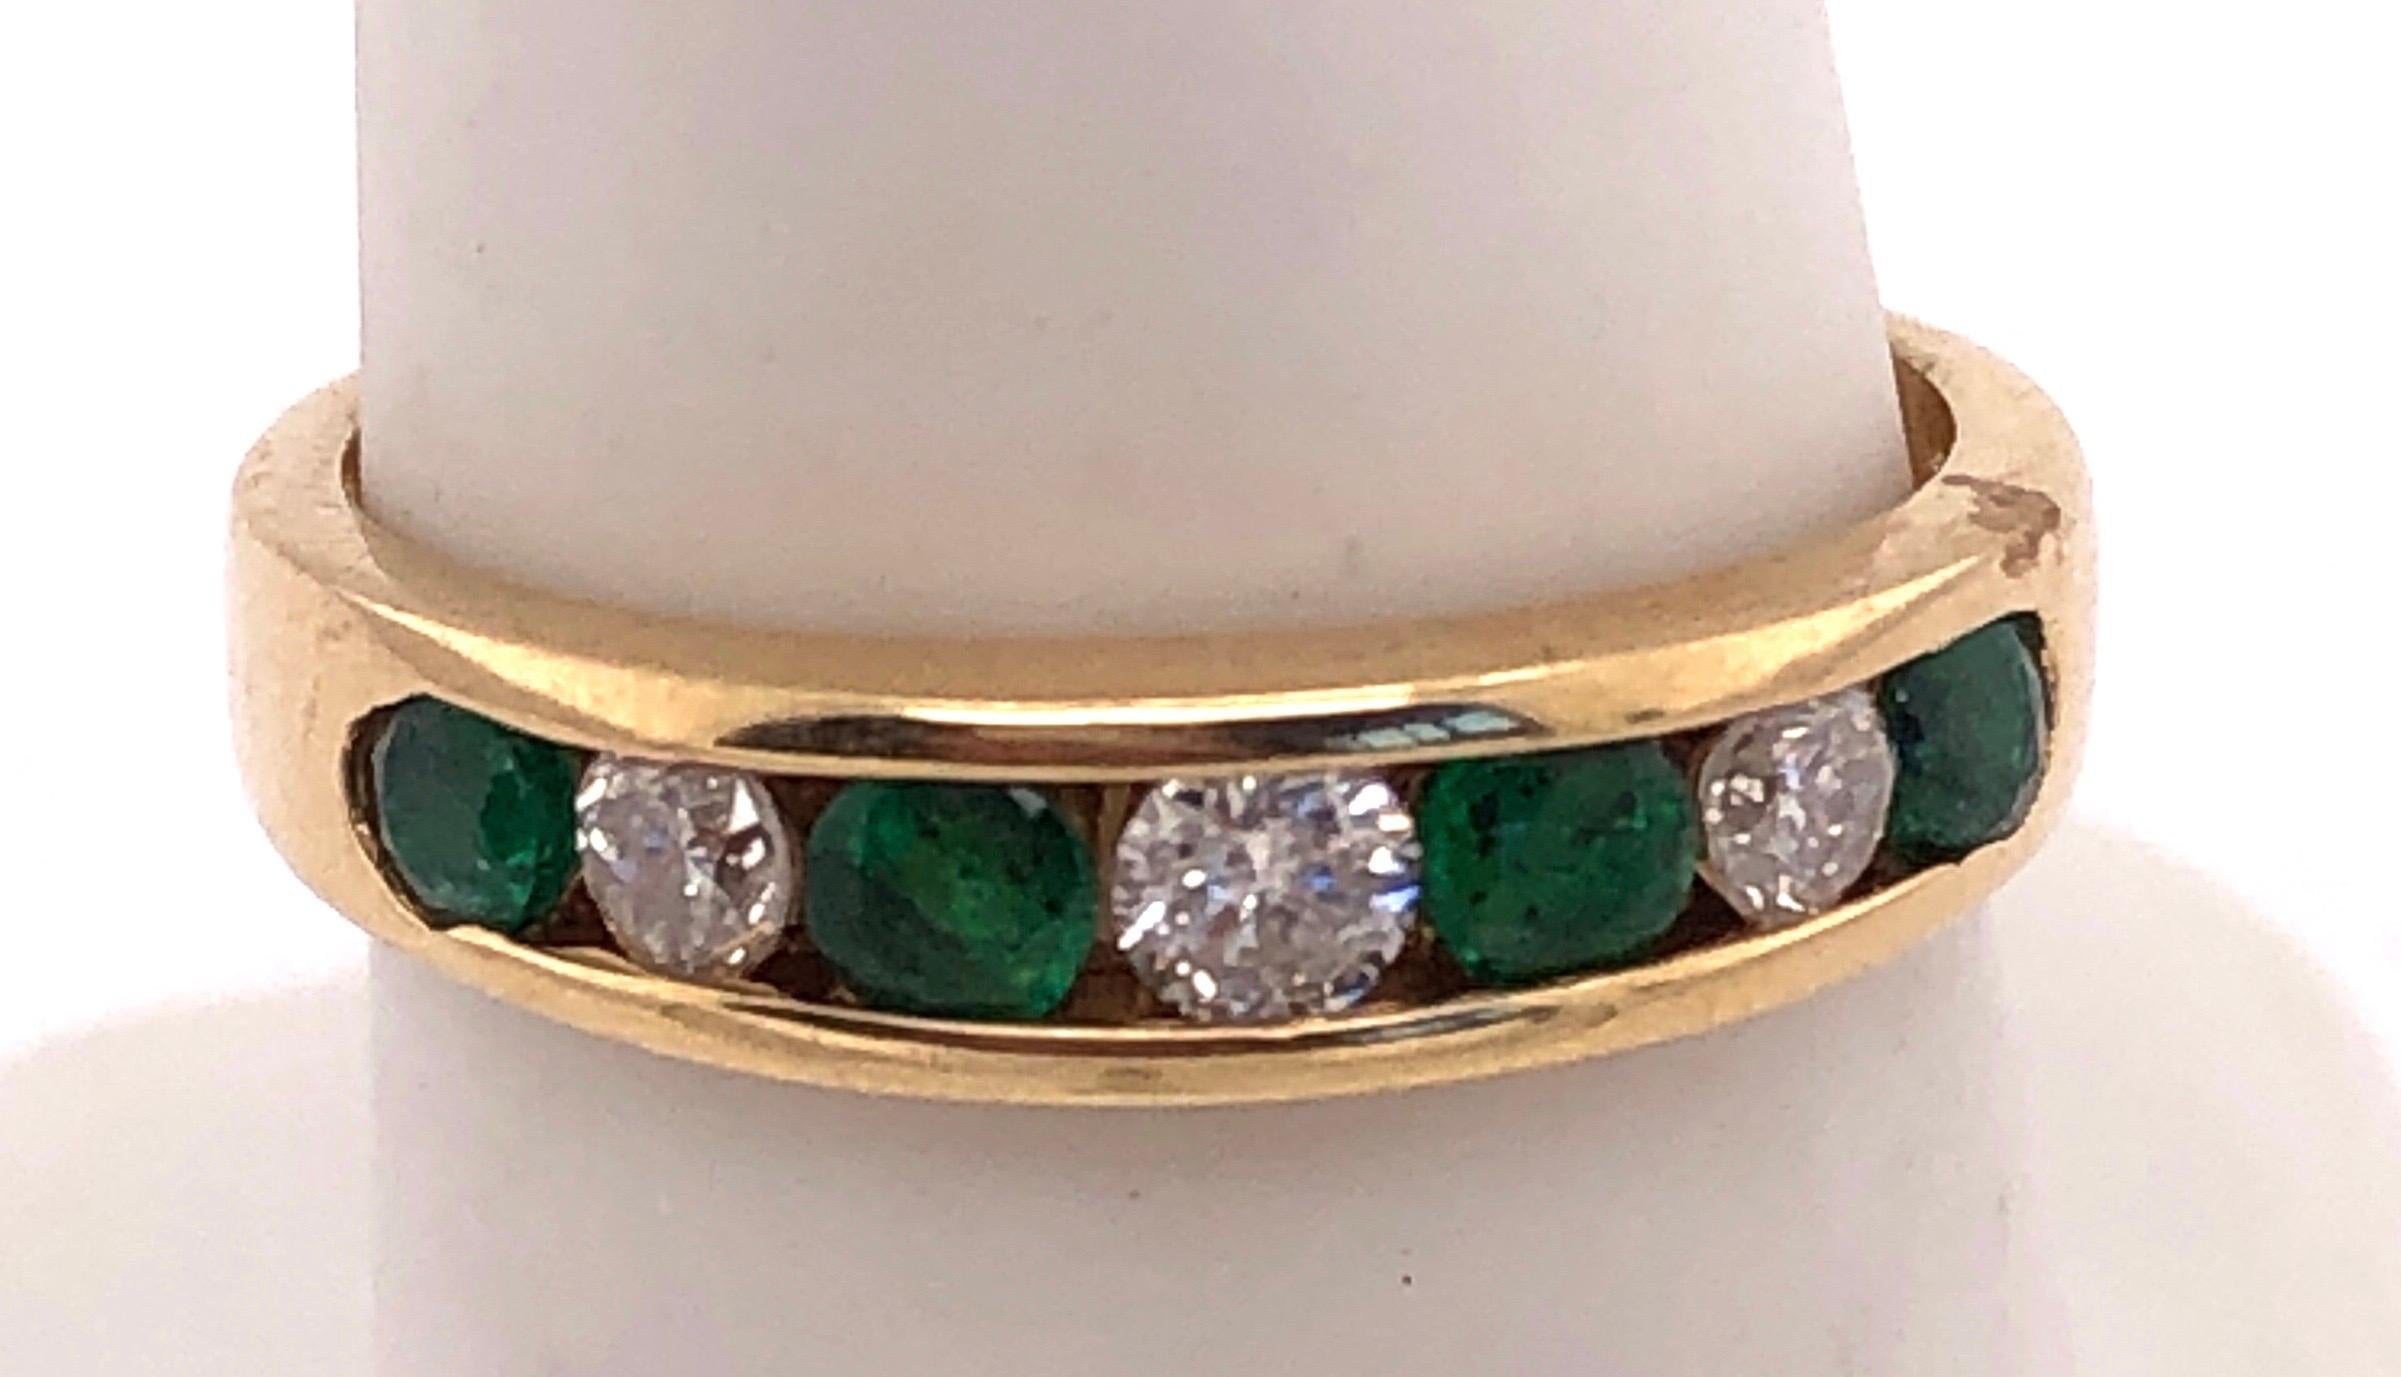 14Kt Yellow Gold Ring Or Wedding Band with Seven Stones Emerald and Diamond
Size 6.7 
0.36 TDW
3 grams total weight.